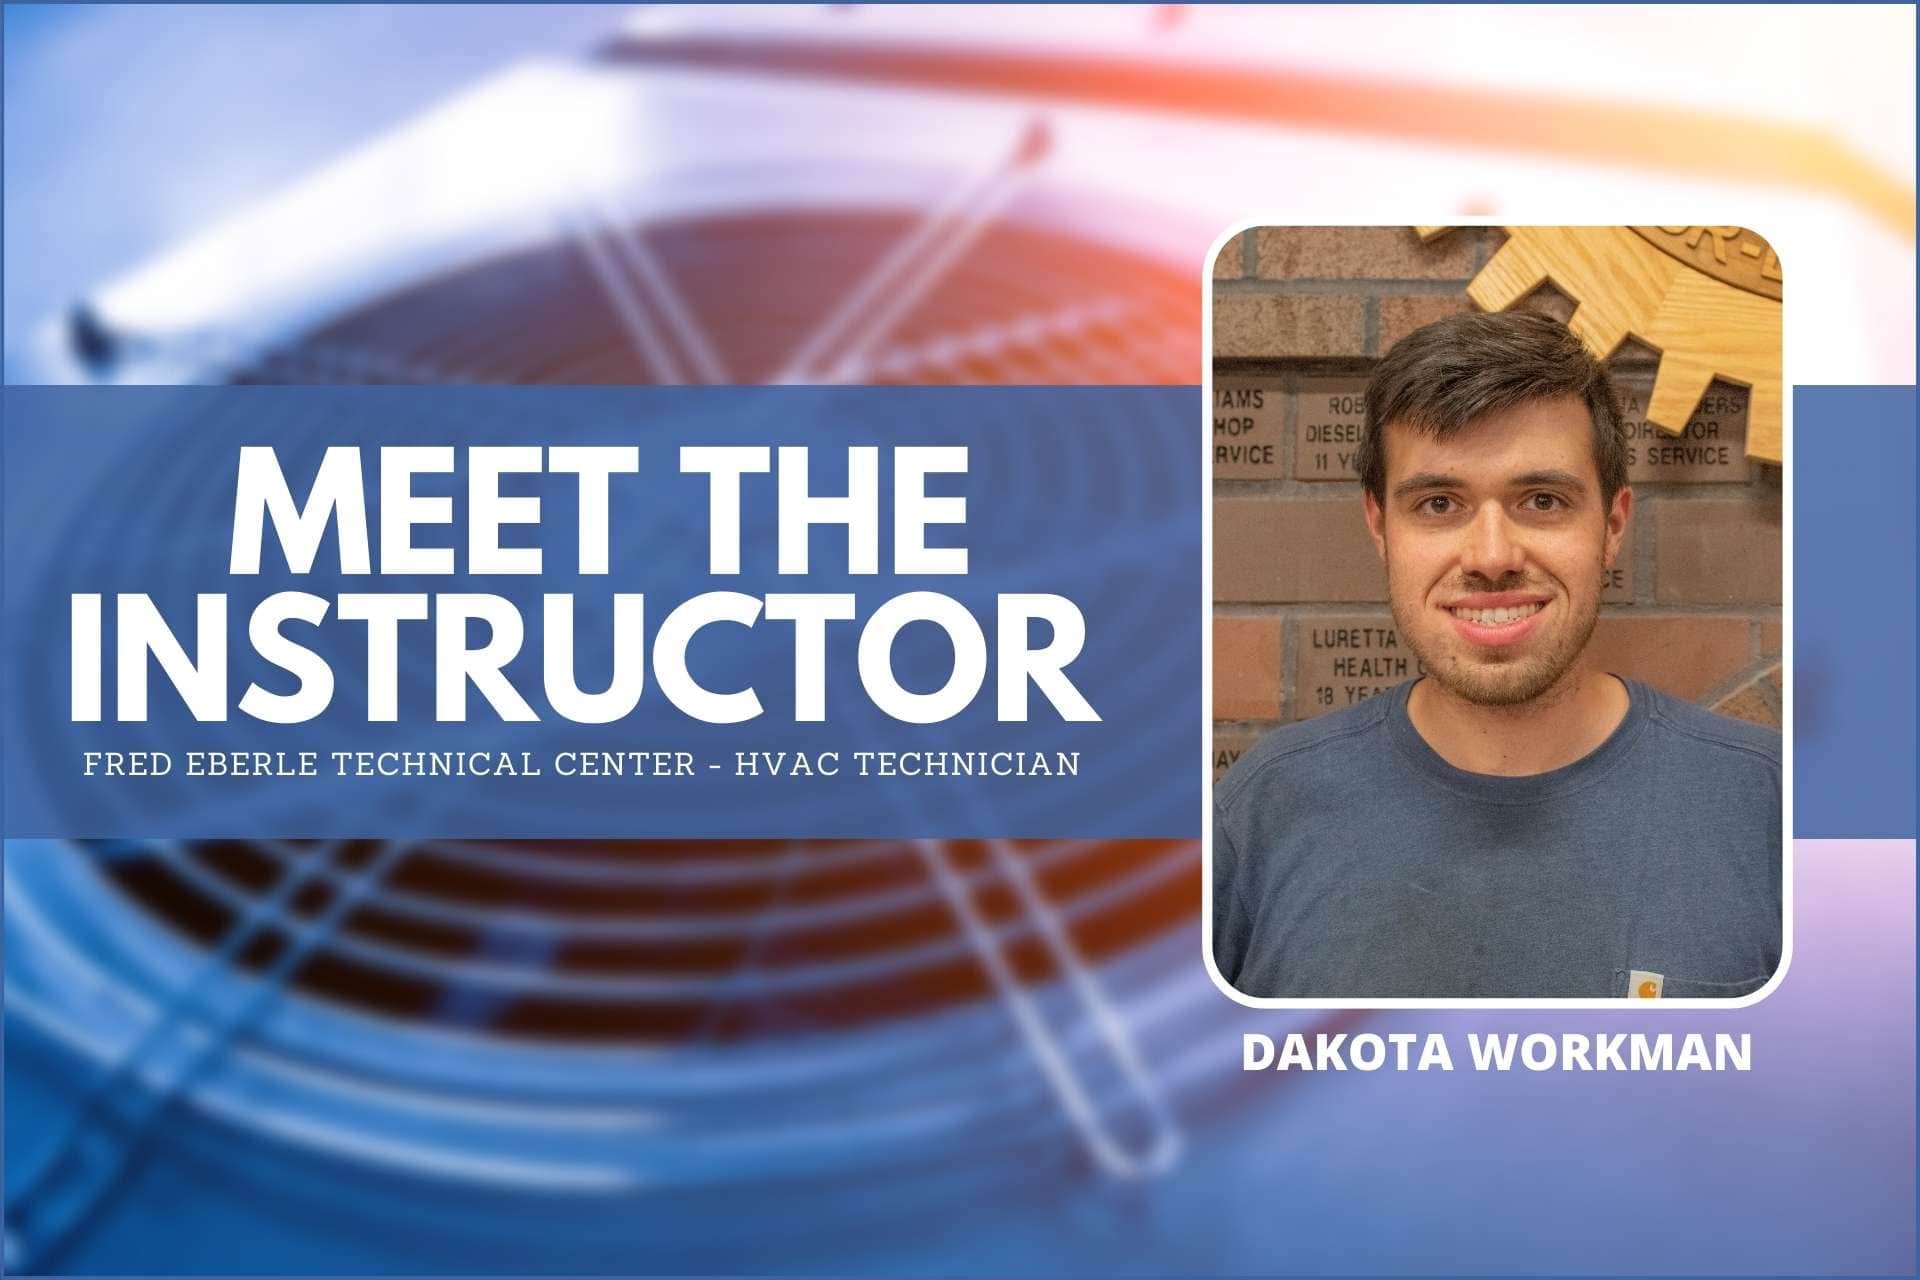 Fred Eberle Technical Center welcomes HVAC Technician instructor – My Buckhannon